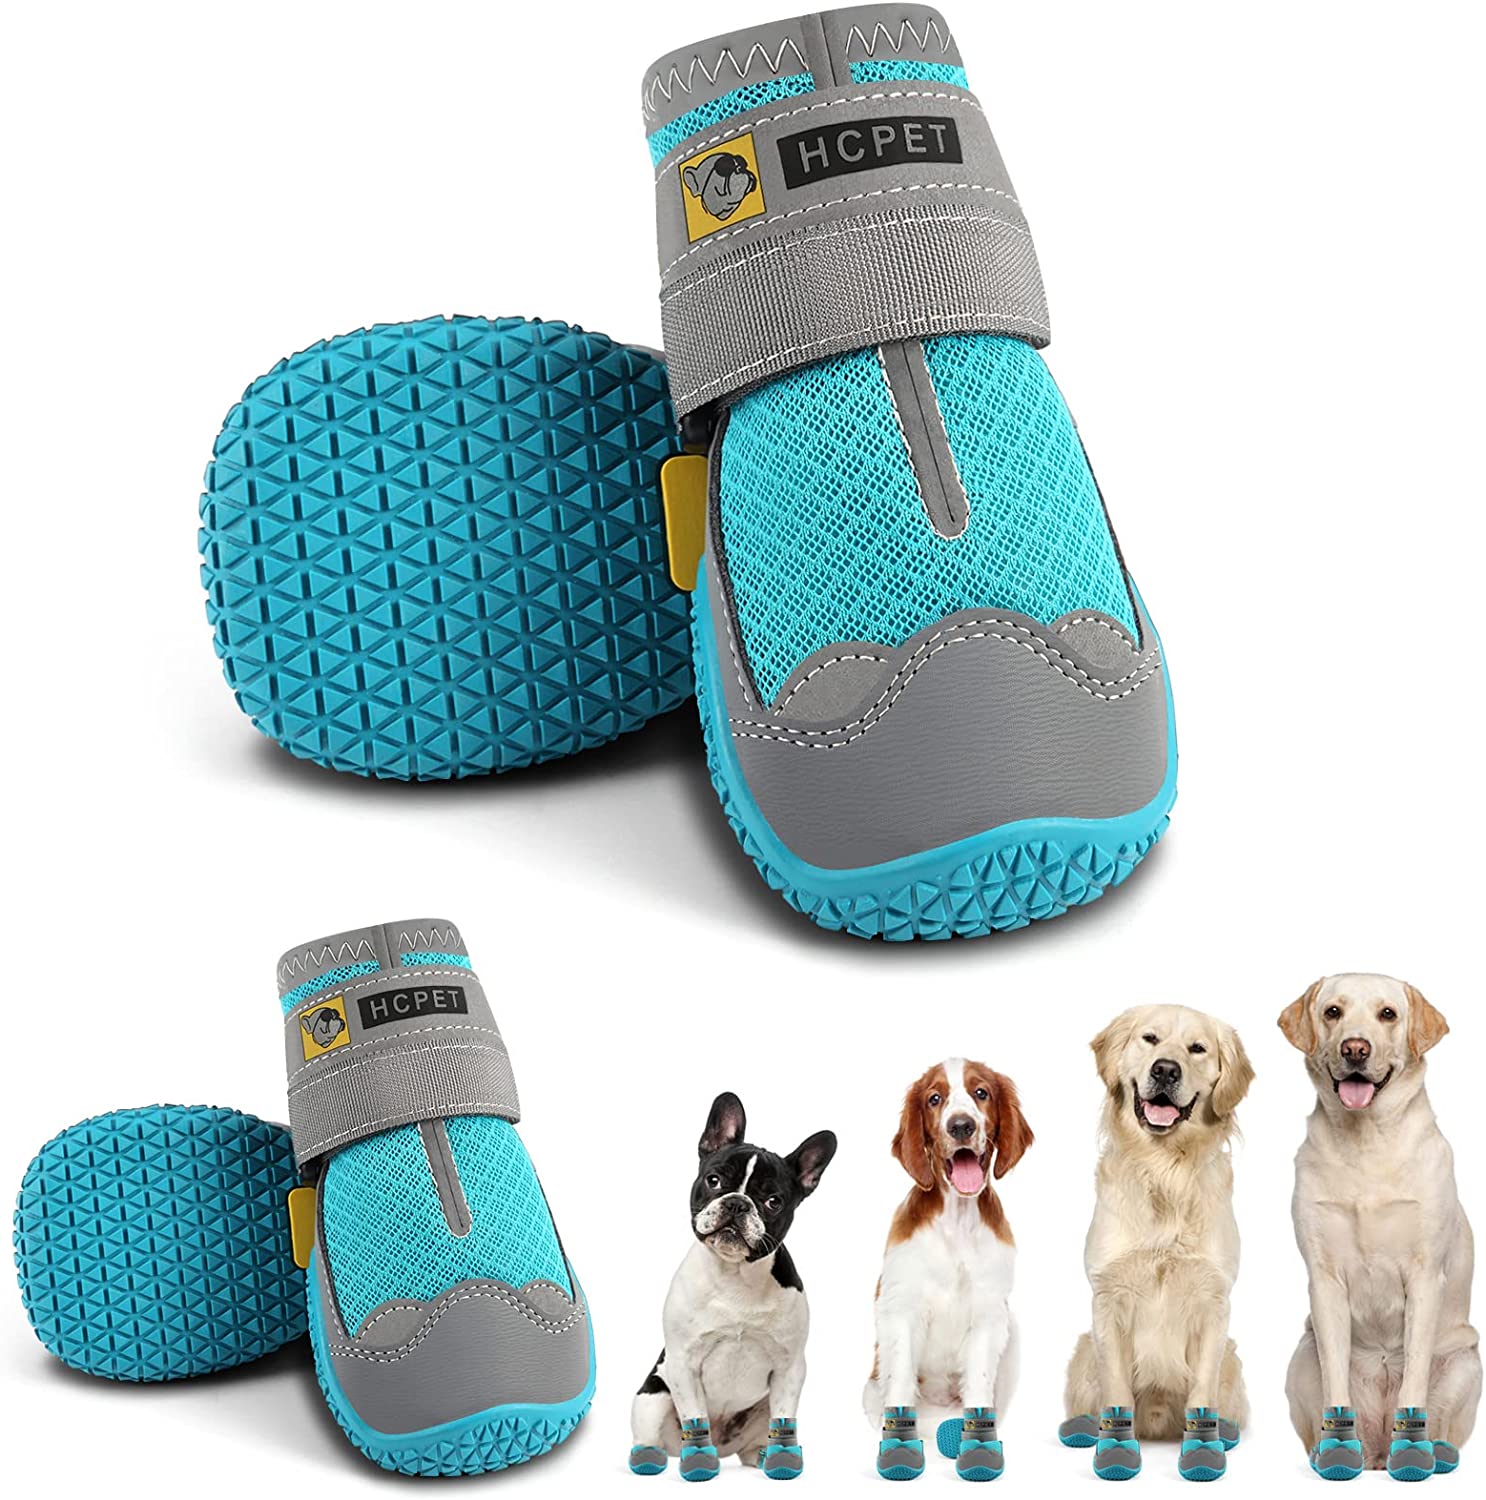 Hcpet Breathable All-Terrain Dog Boots